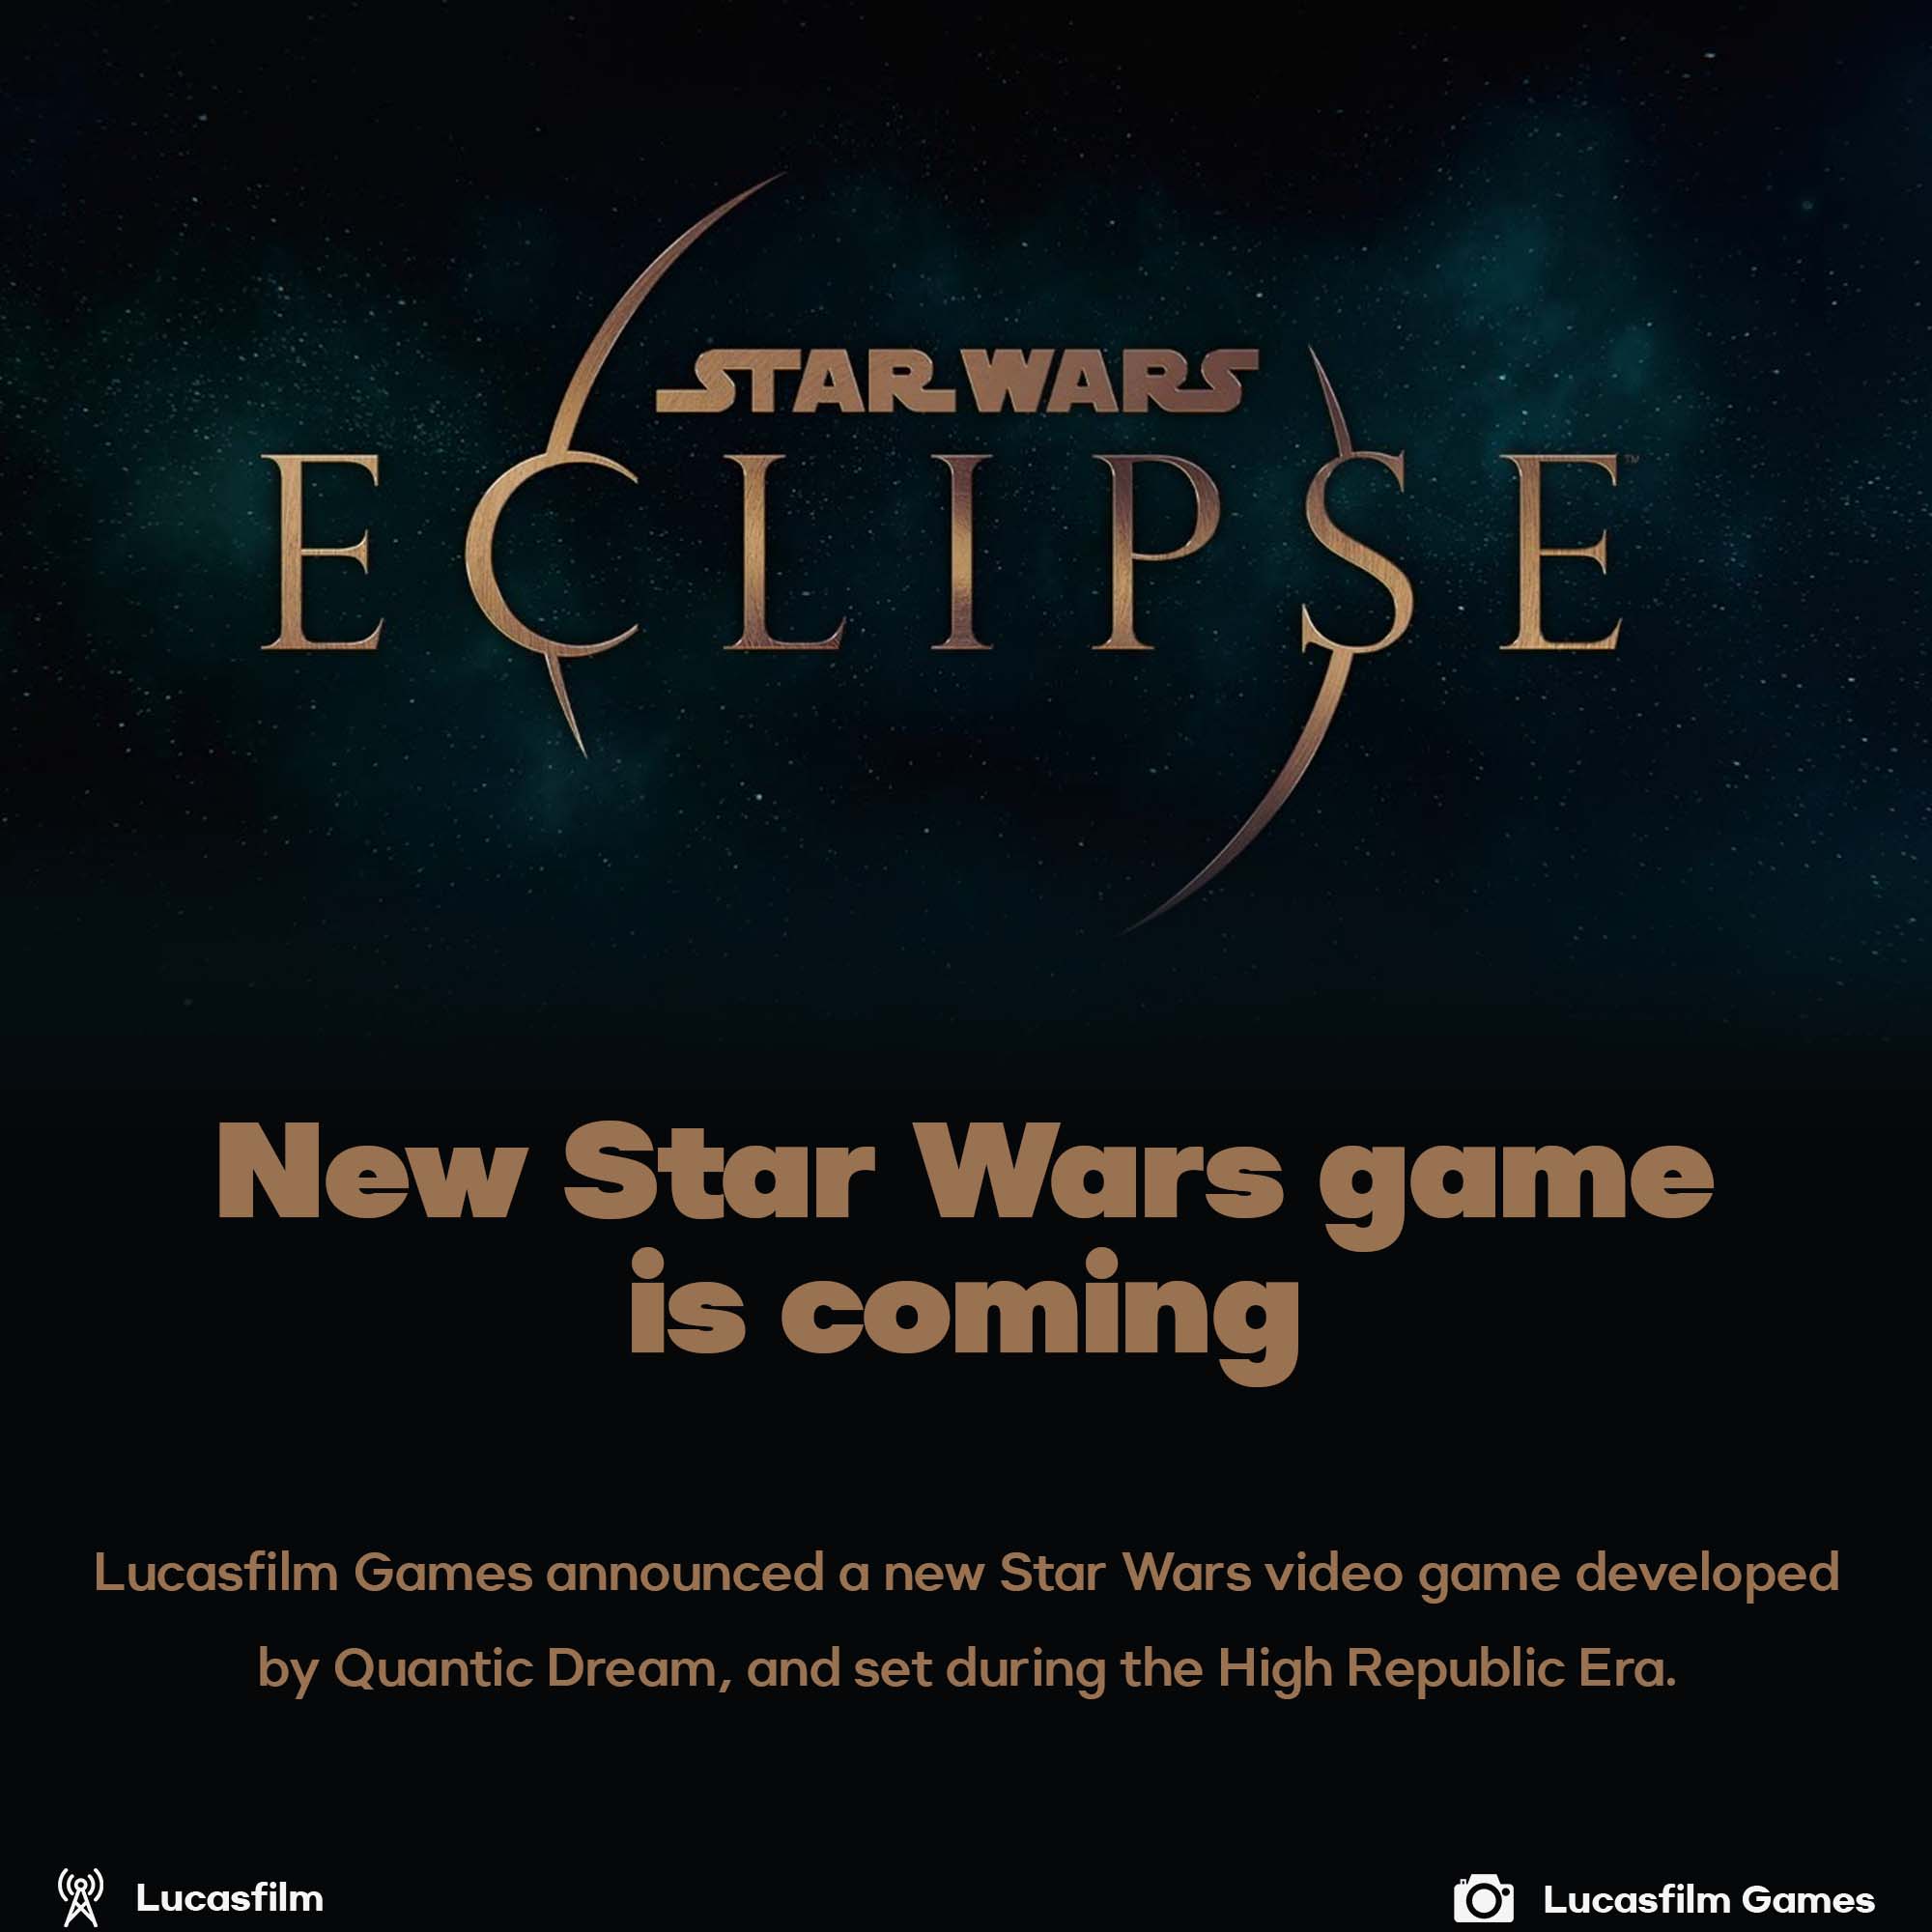 New Star Wars game announced